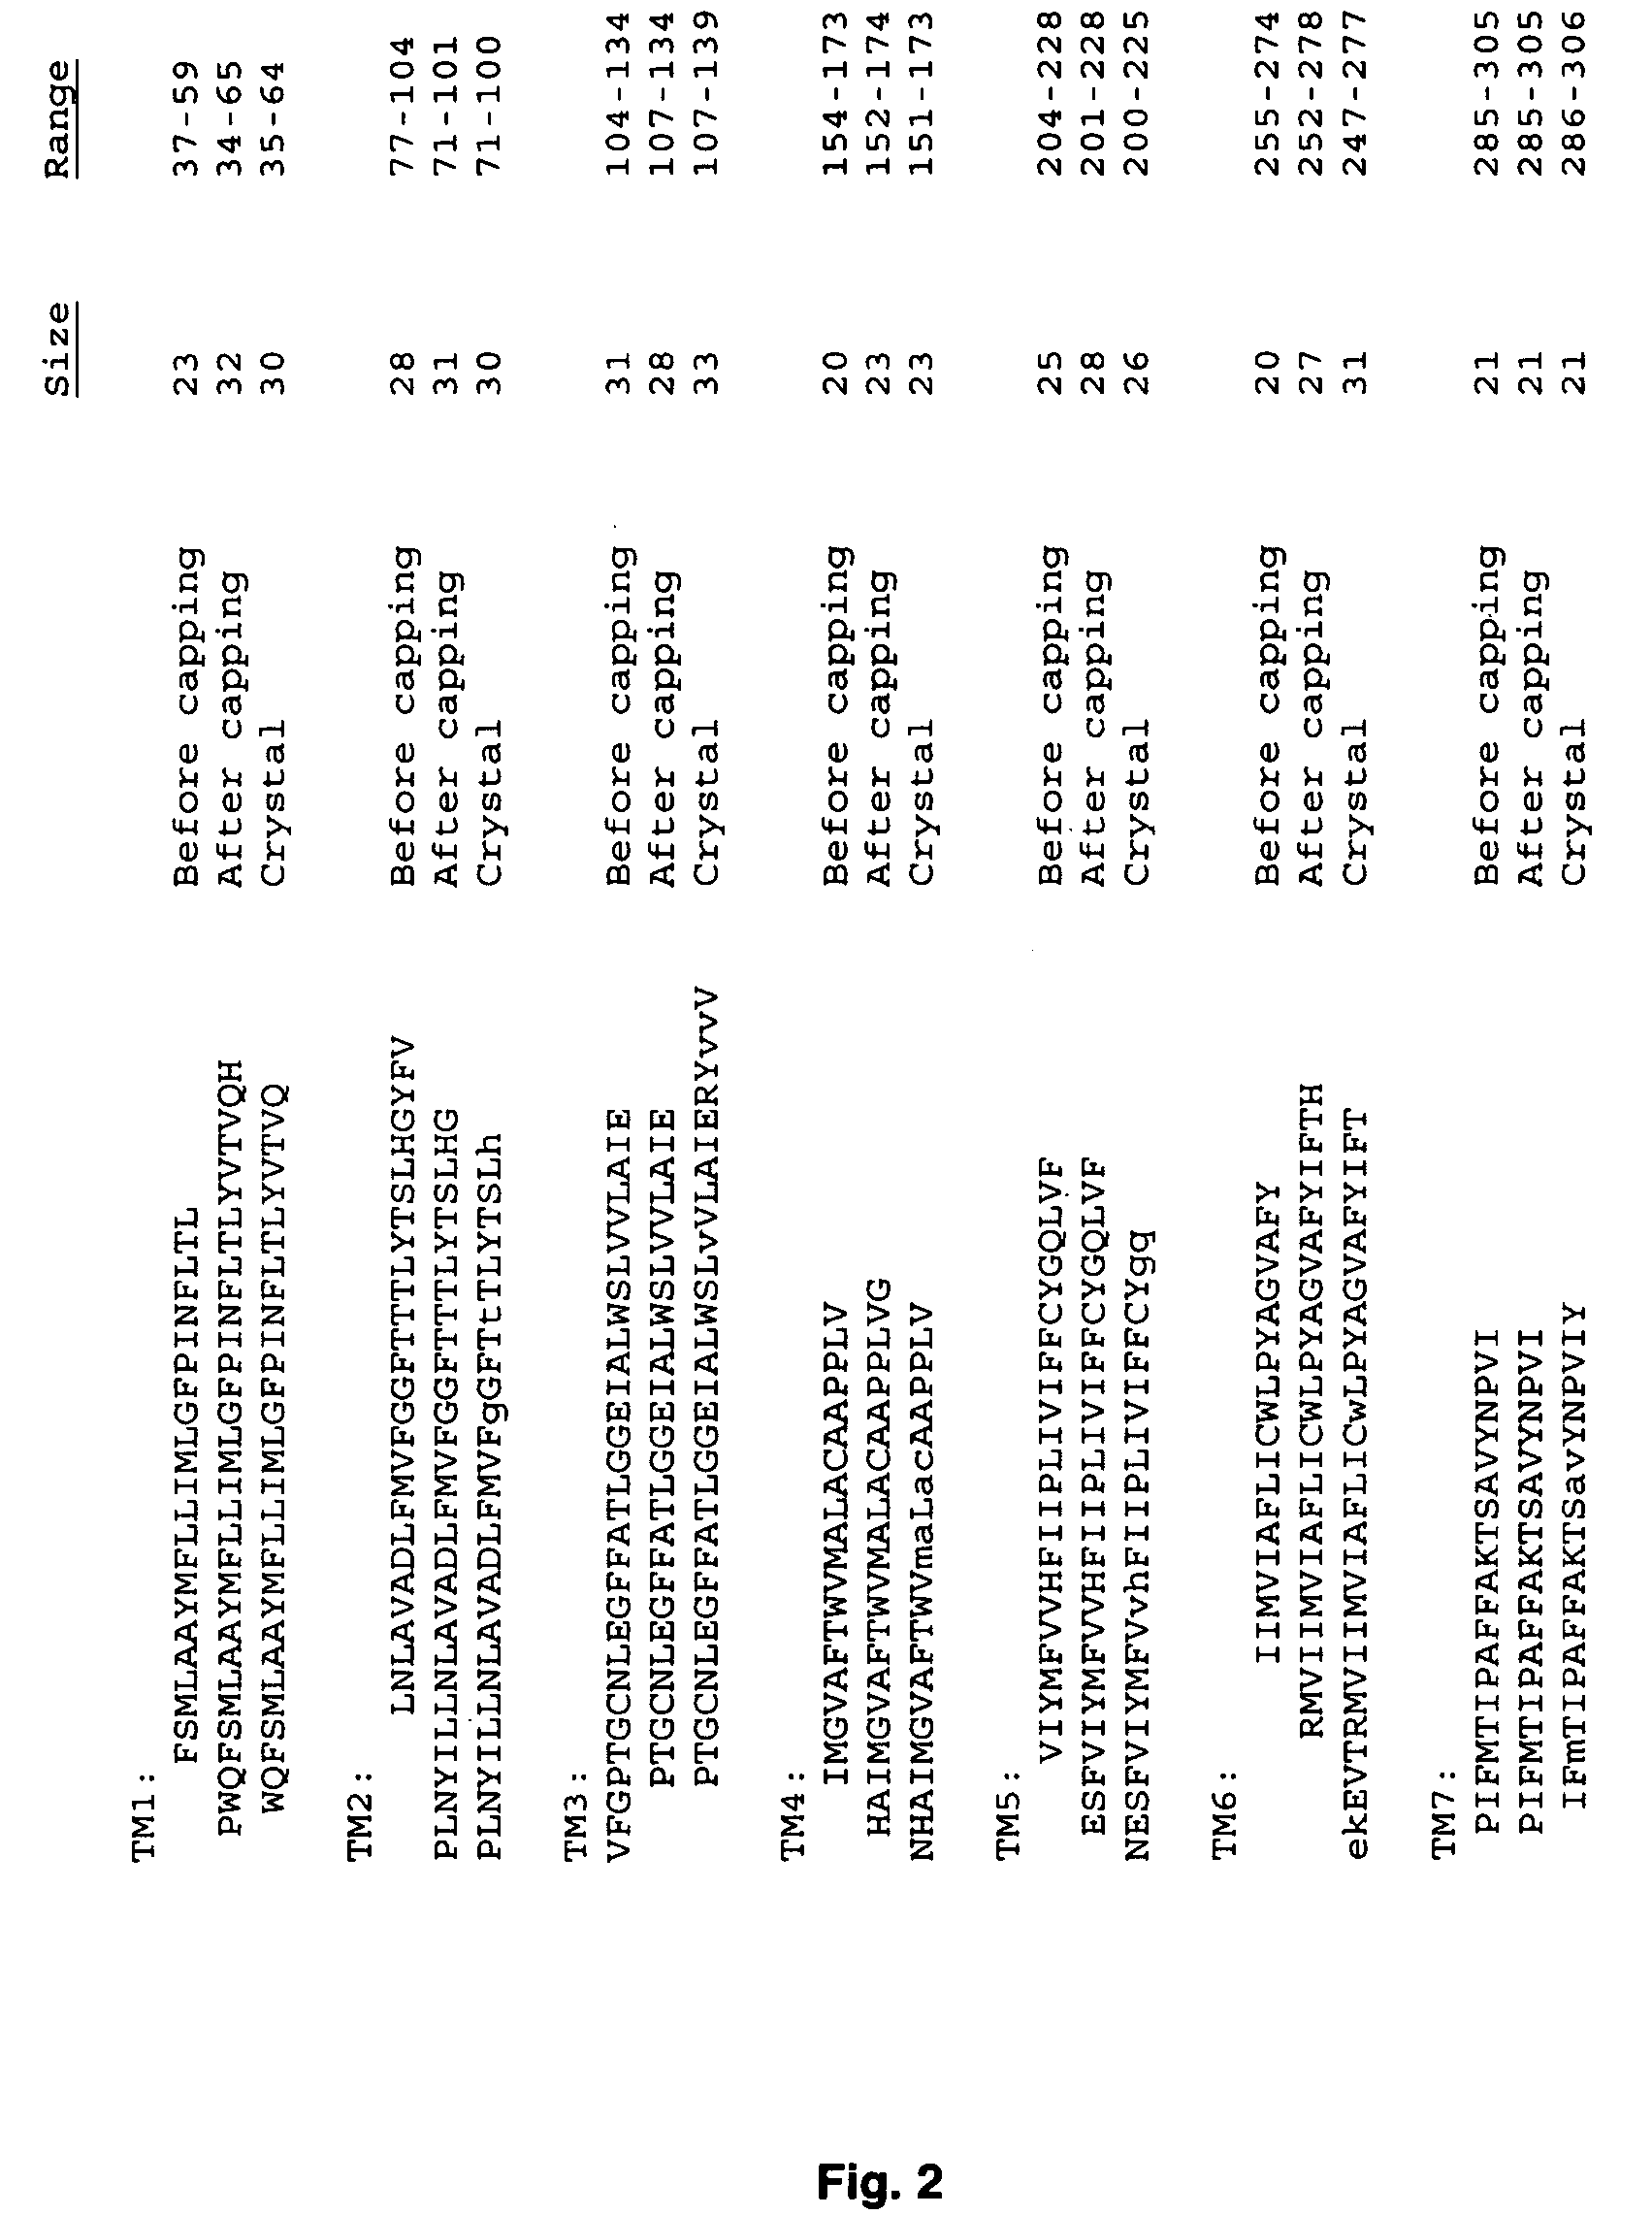 Systems and methods for predicting the structure and function of multipass transmembrane proteins